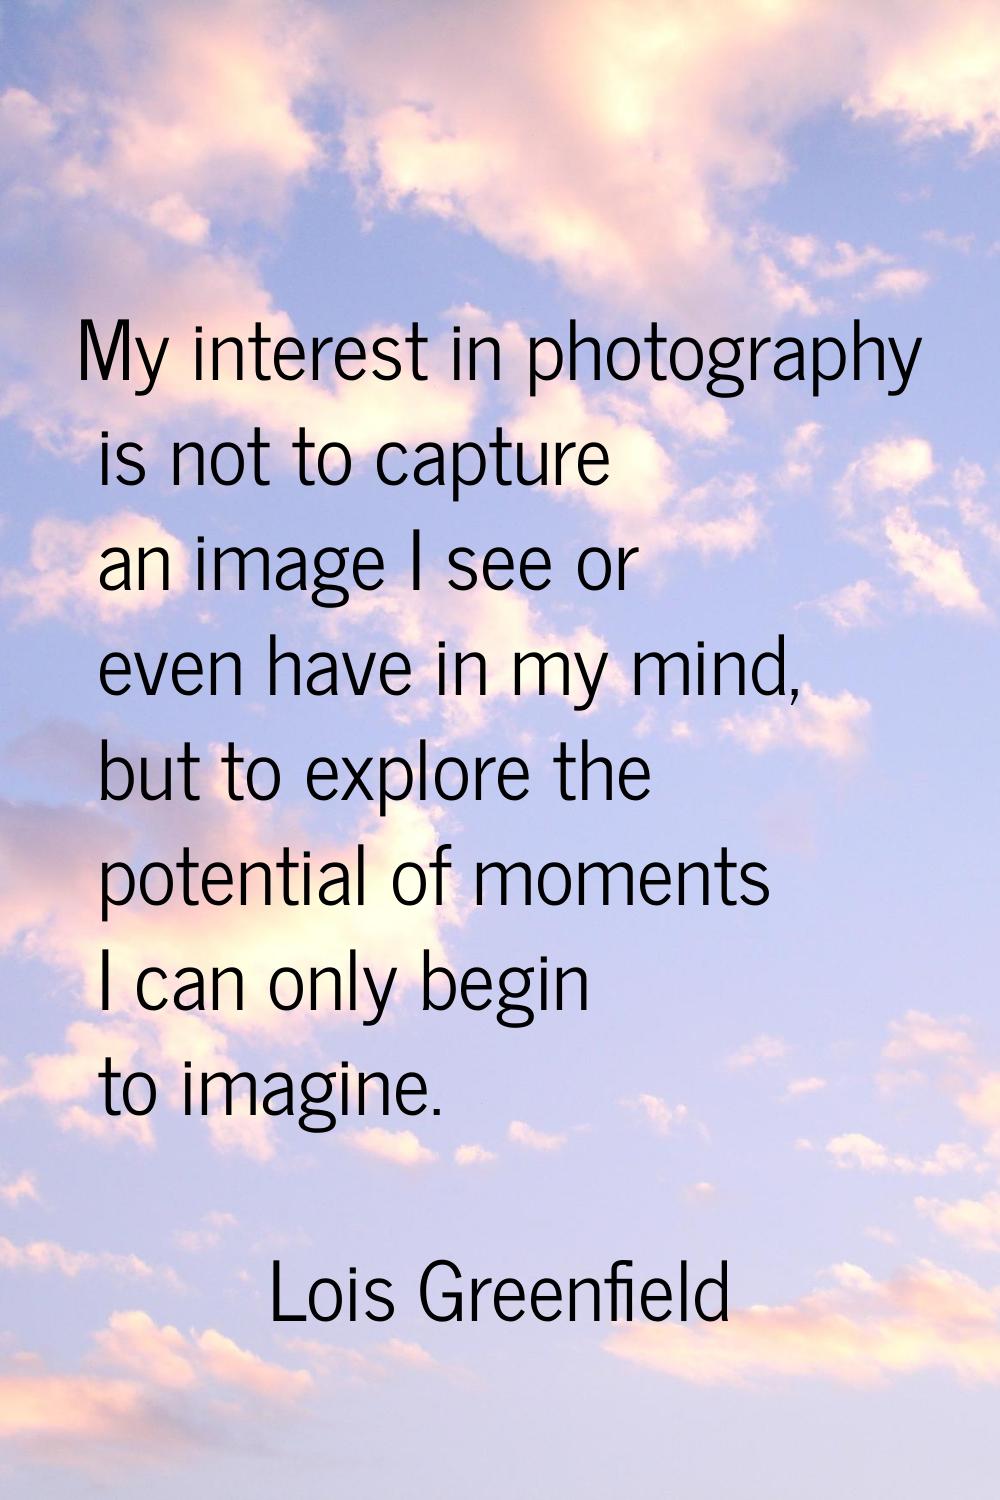 My interest in photography is not to capture an image I see or even have in my mind, but to explore